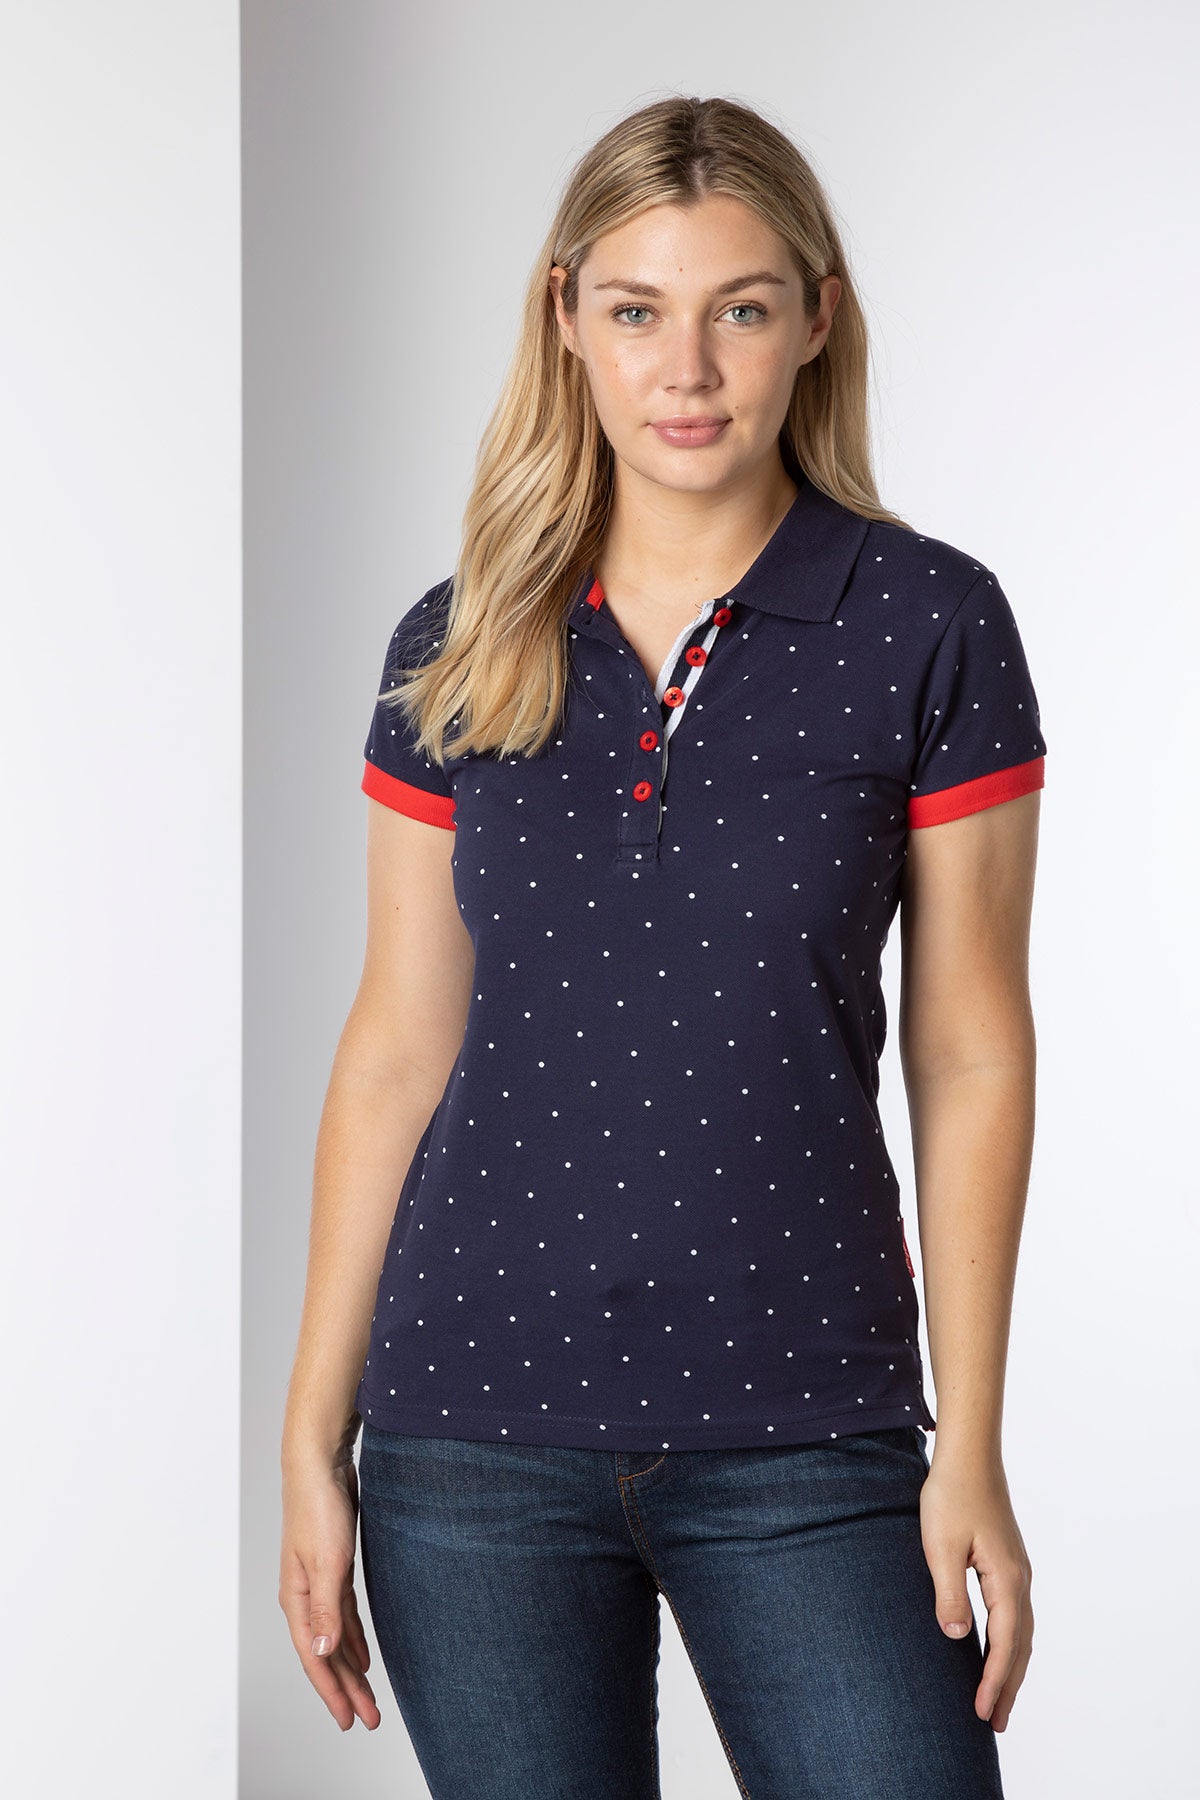 Ladies Navy Polo Shirt UK | Women's Polo Shirts & Tops | Rydale